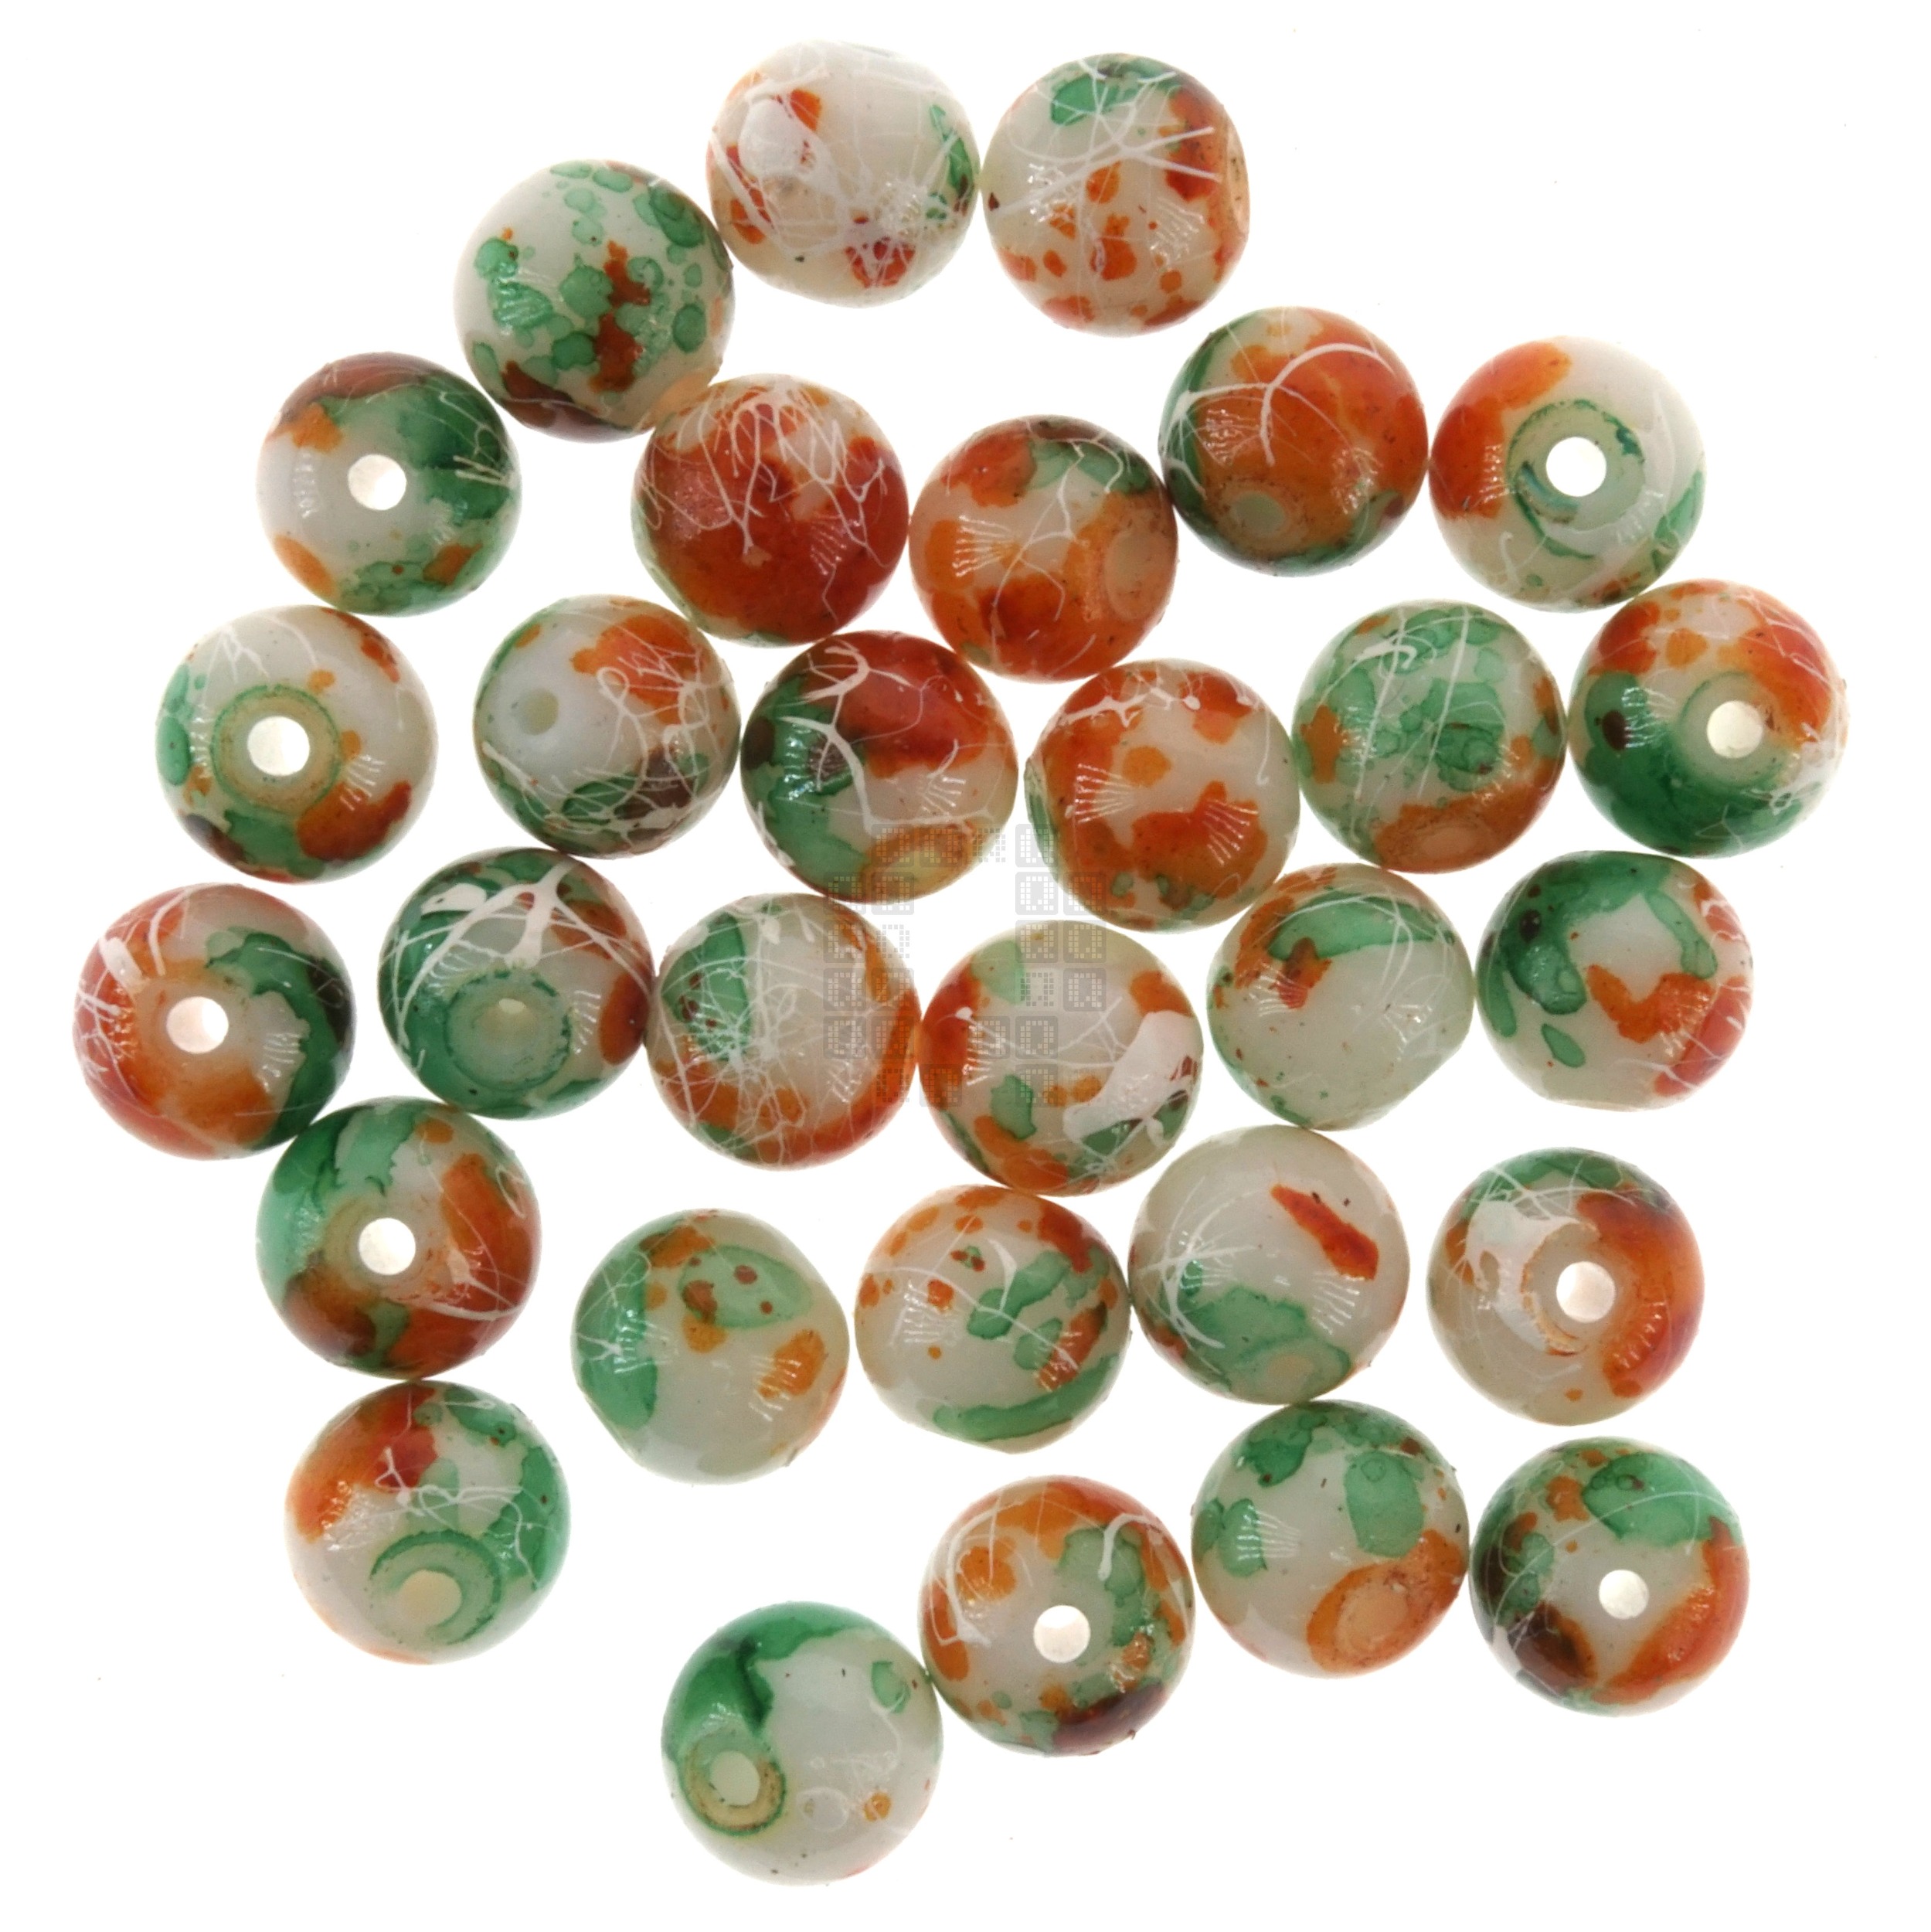 Tiger Lily 8mm Loose Glass Beads, 30 Pieces